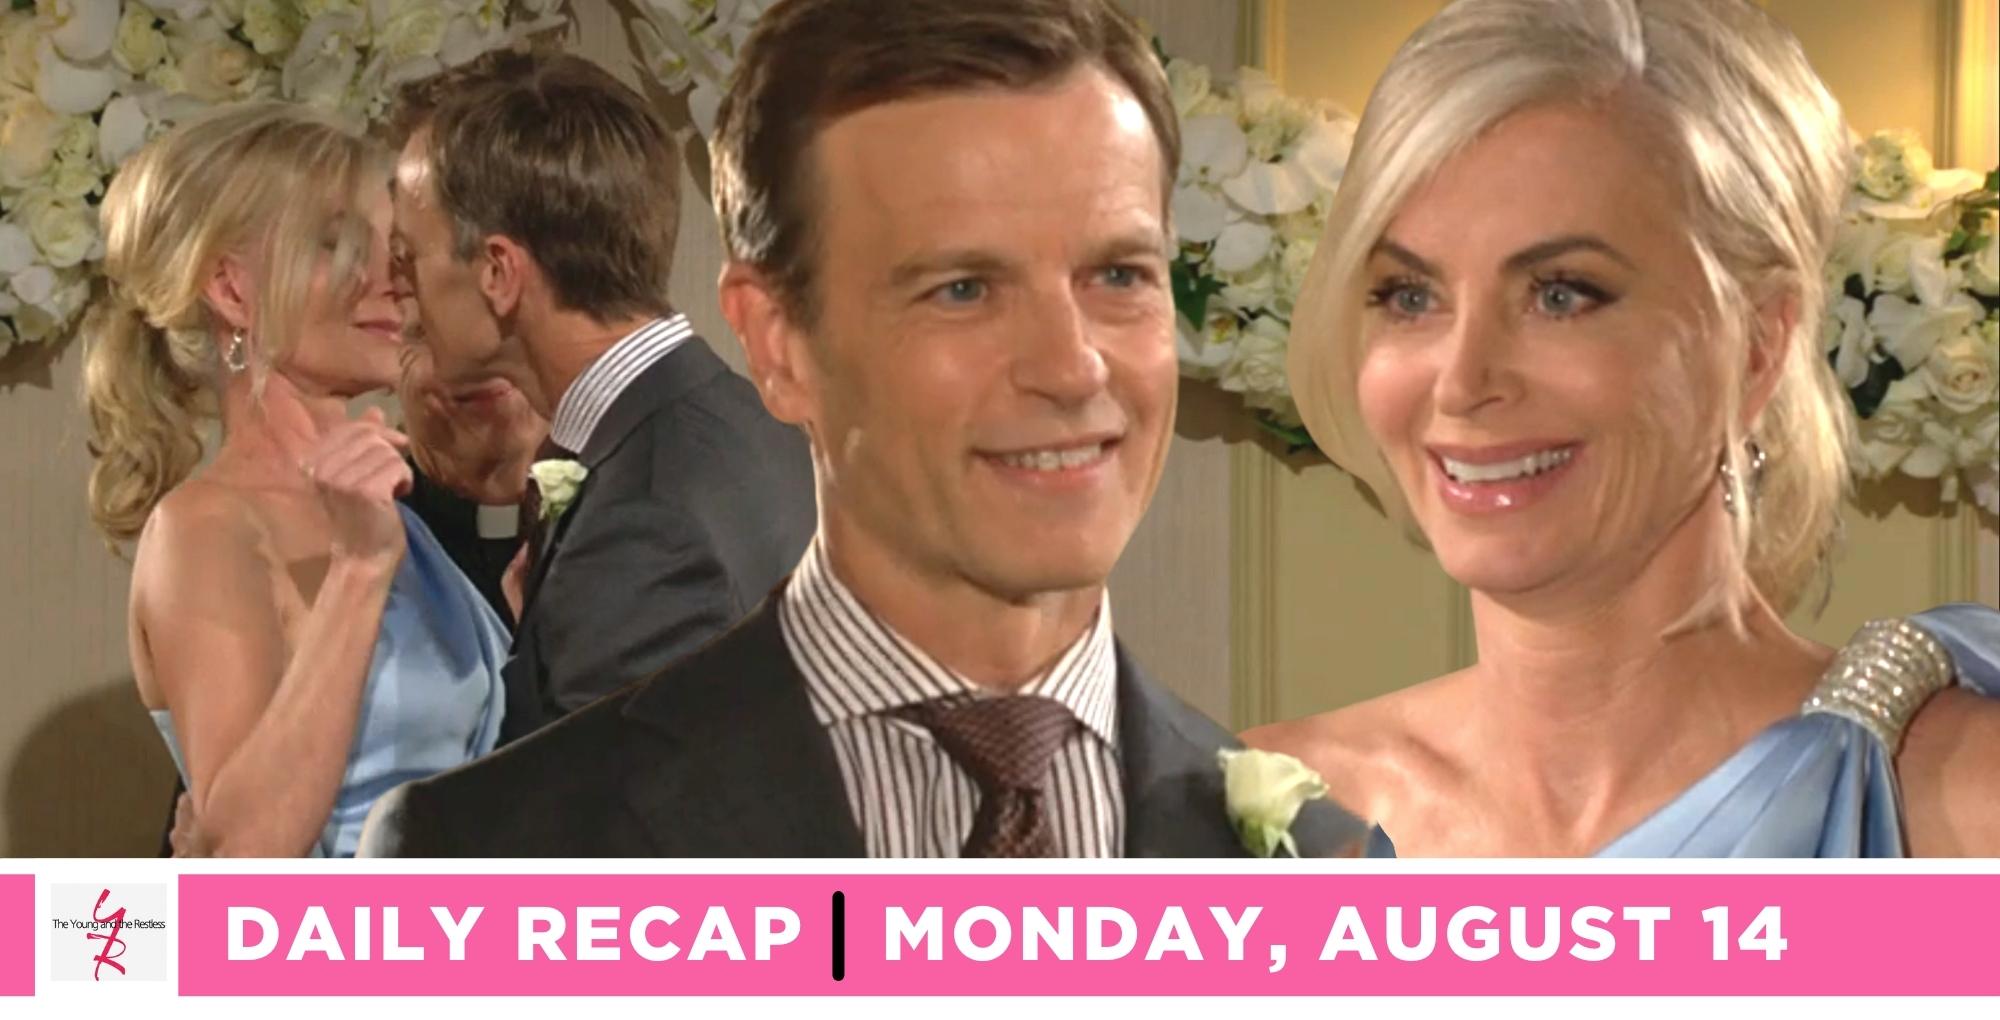 the young and the restless recap for august 14, 2023, has tucker and ashley getting married and kissing.